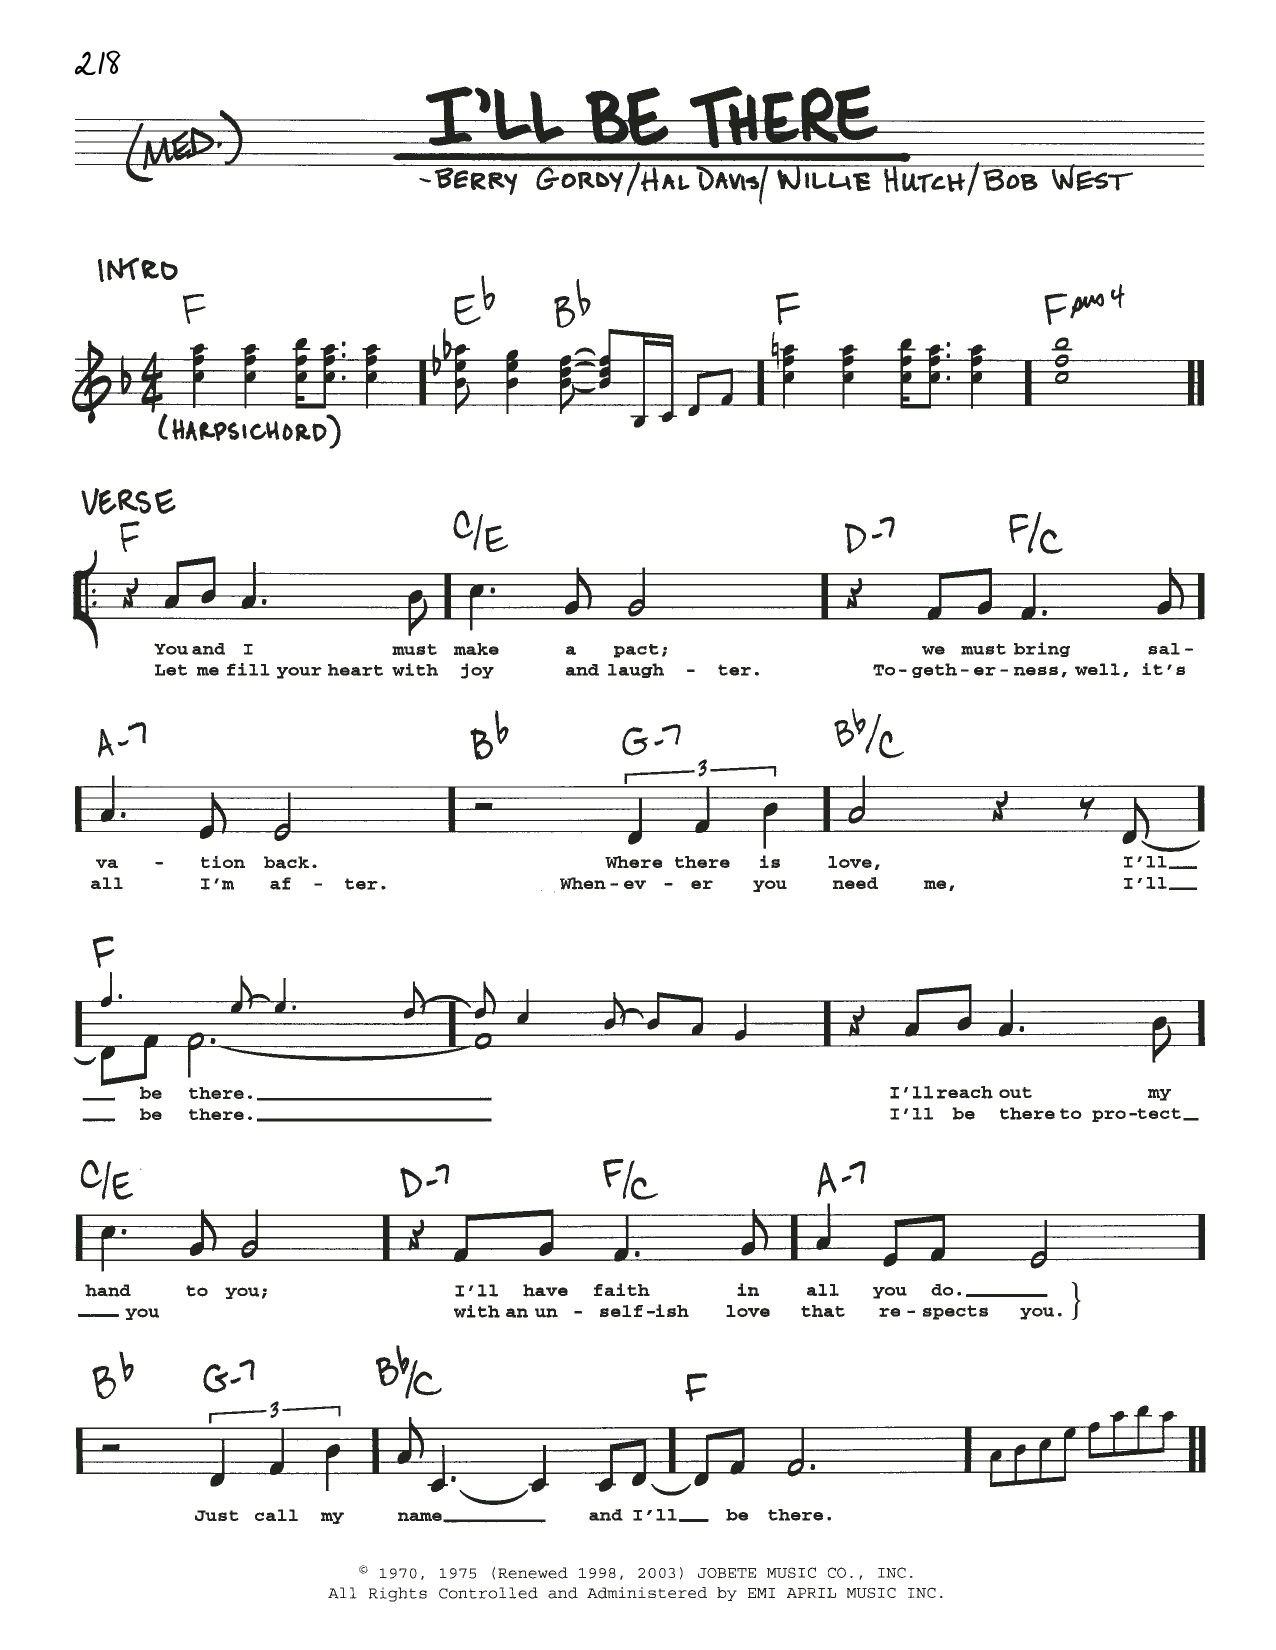 Download The Jackson 5 I'll Be There Sheet Music